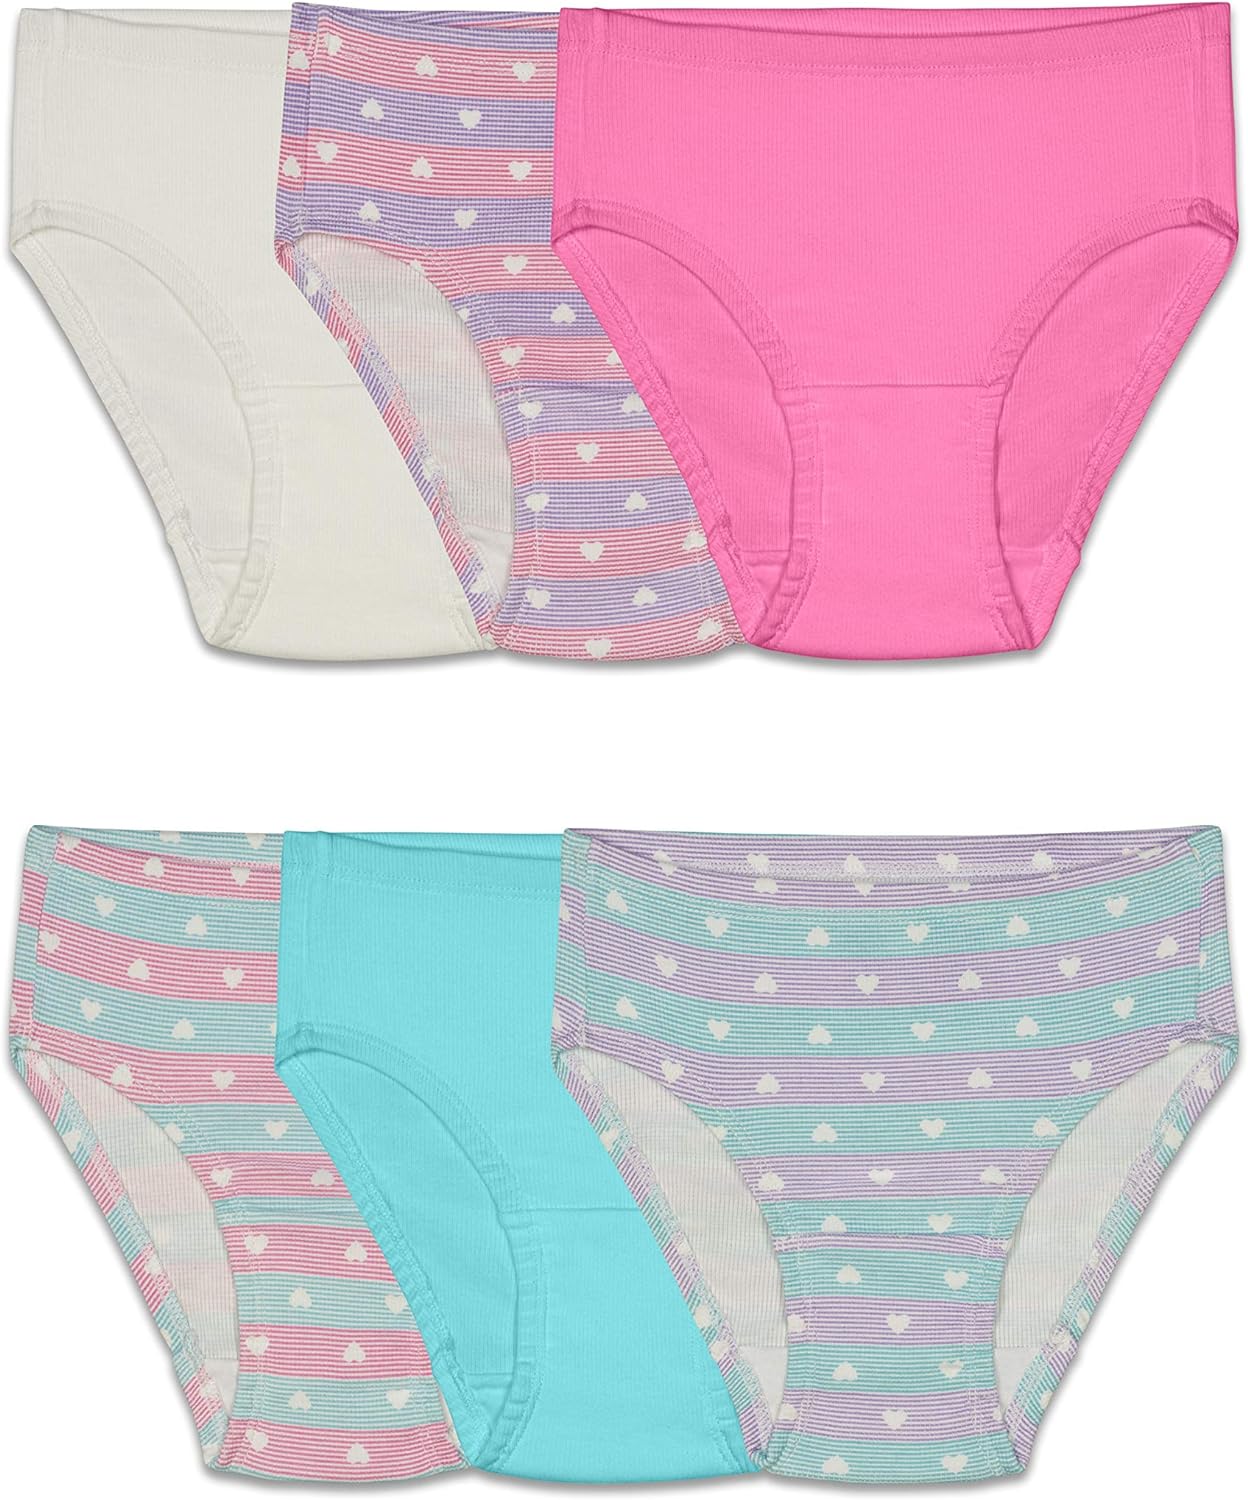 Fruit of the Loom Girls' Toddler Flexible Fit Brief